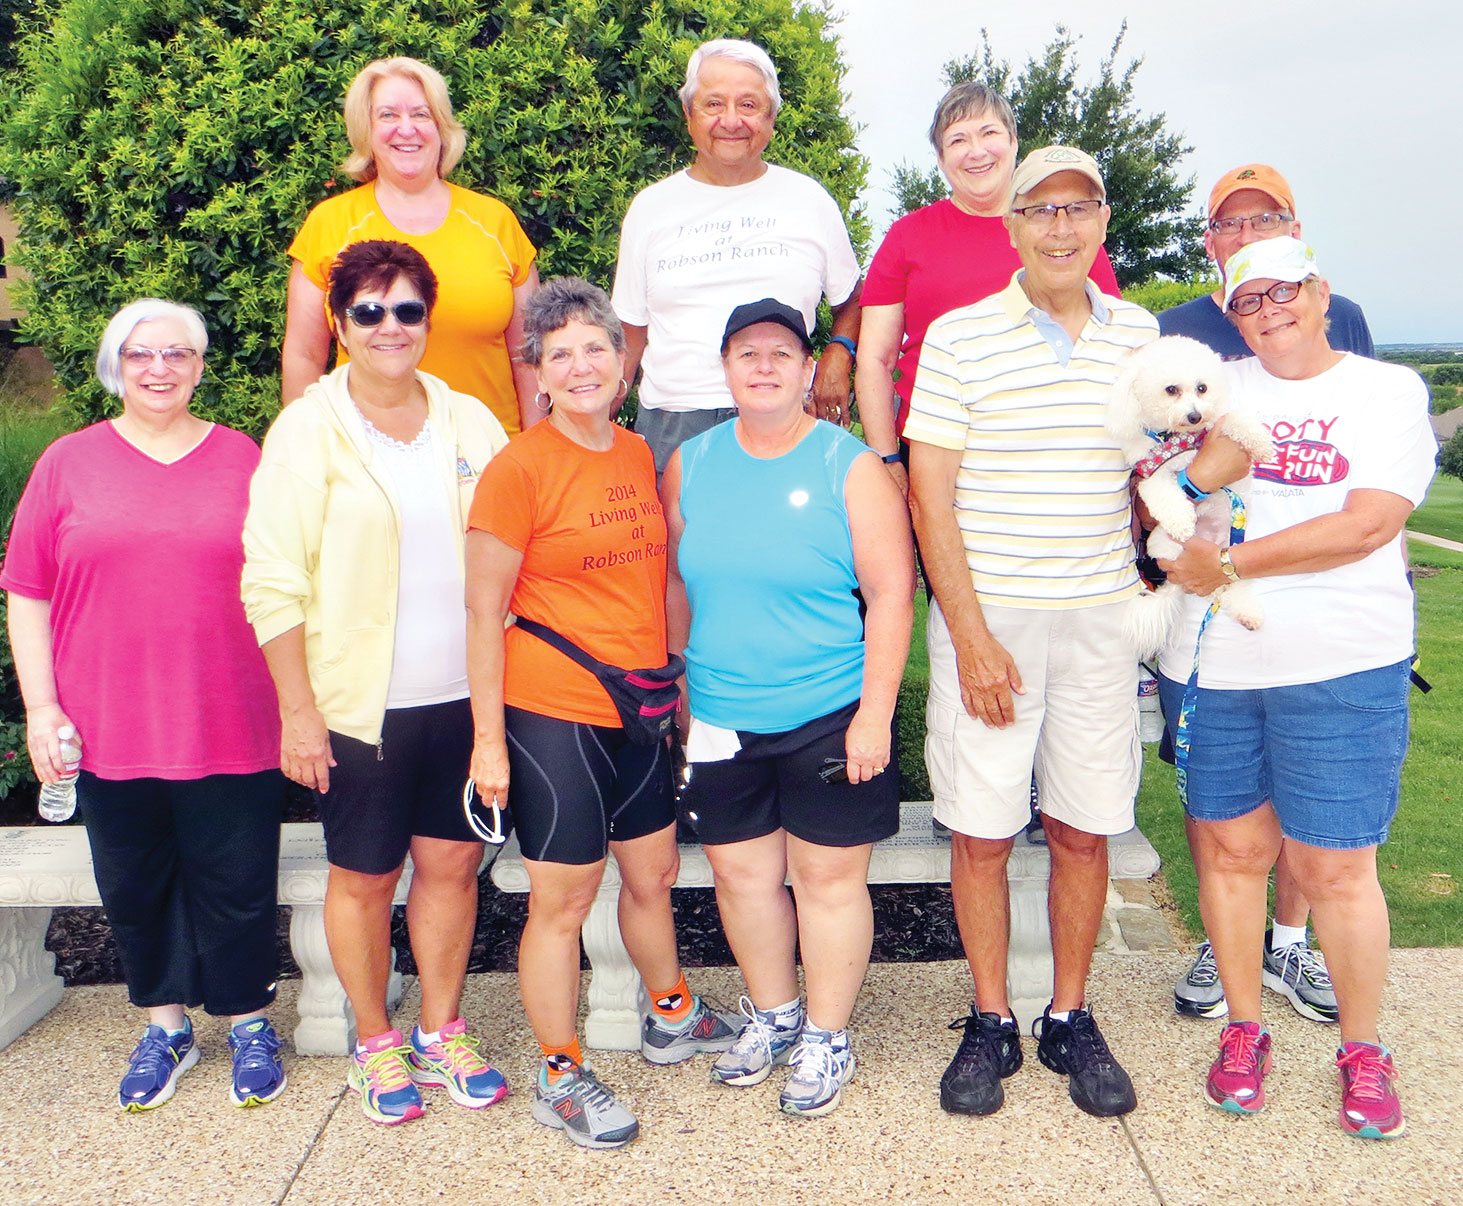 Living Well walkers reap healthful benefits to body and mind